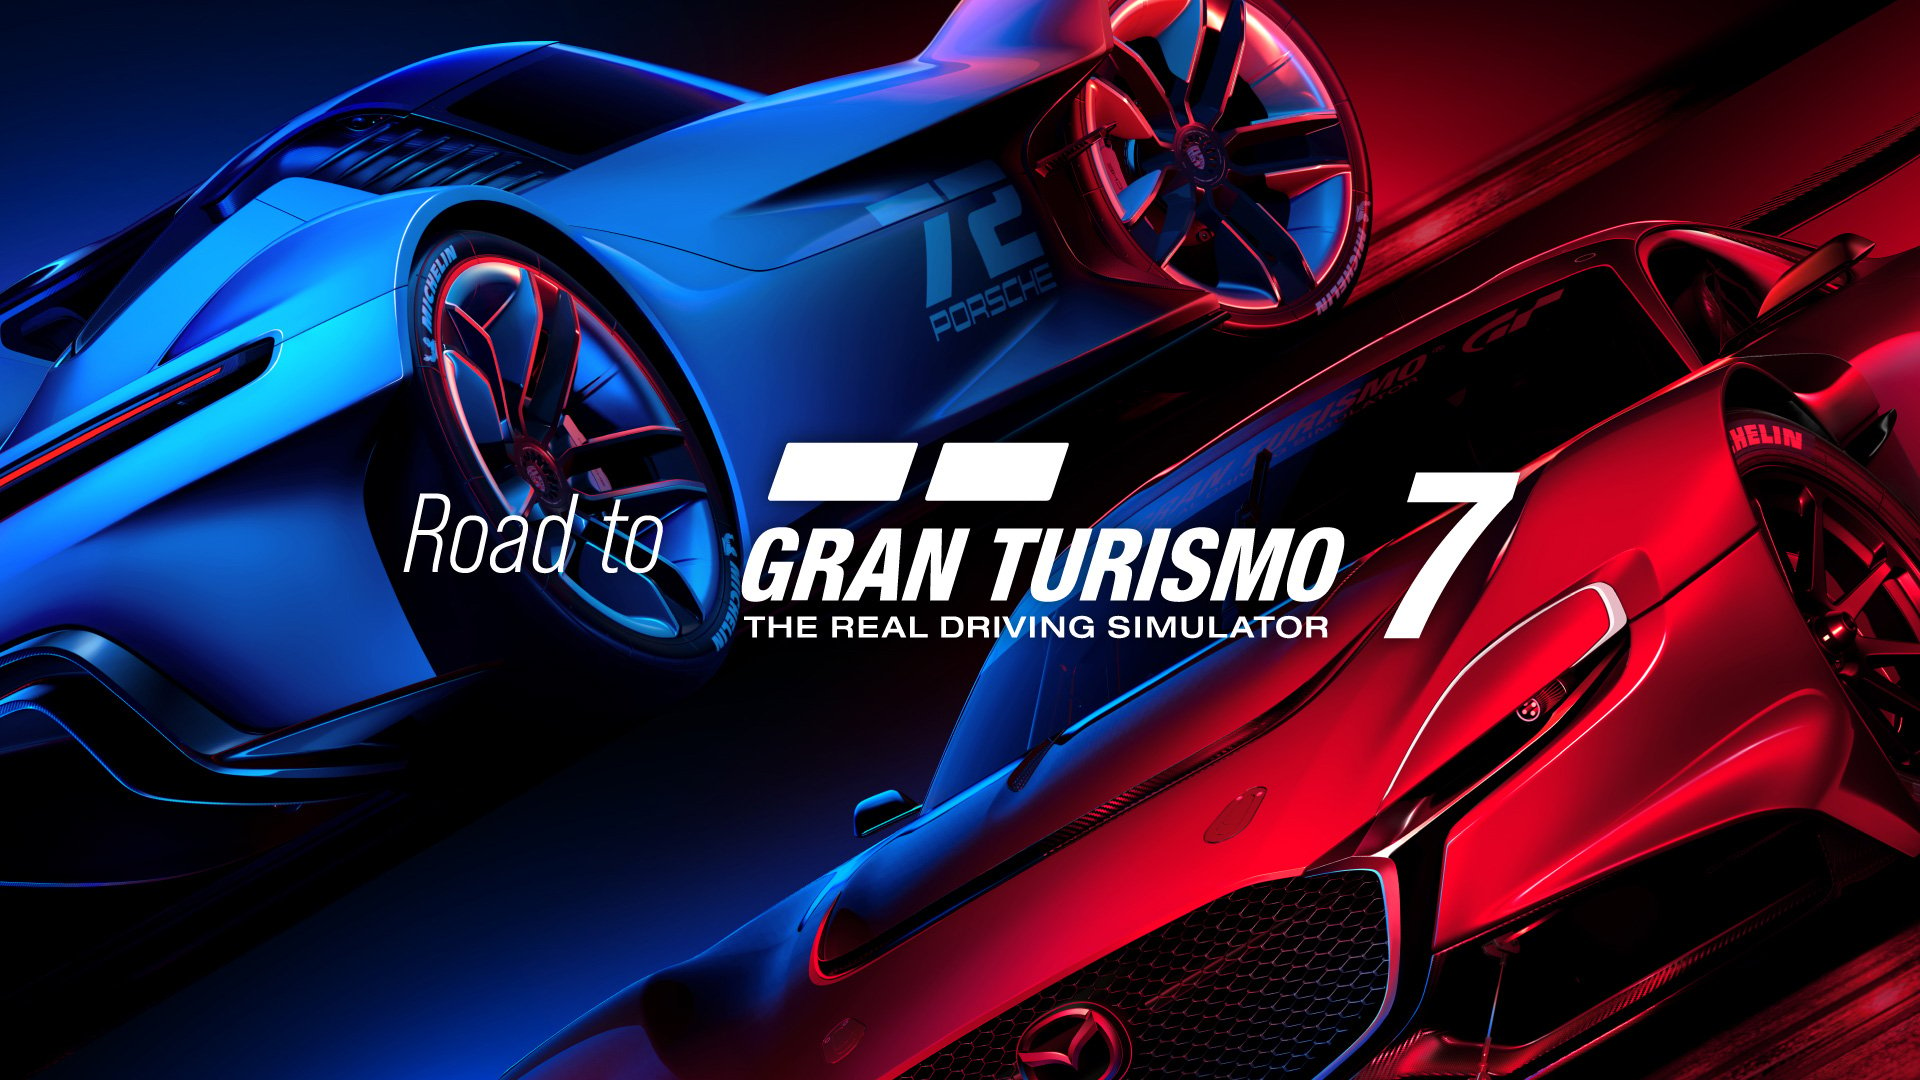 A red and blue car crossing each other with Gran Turismo 7 title in between.